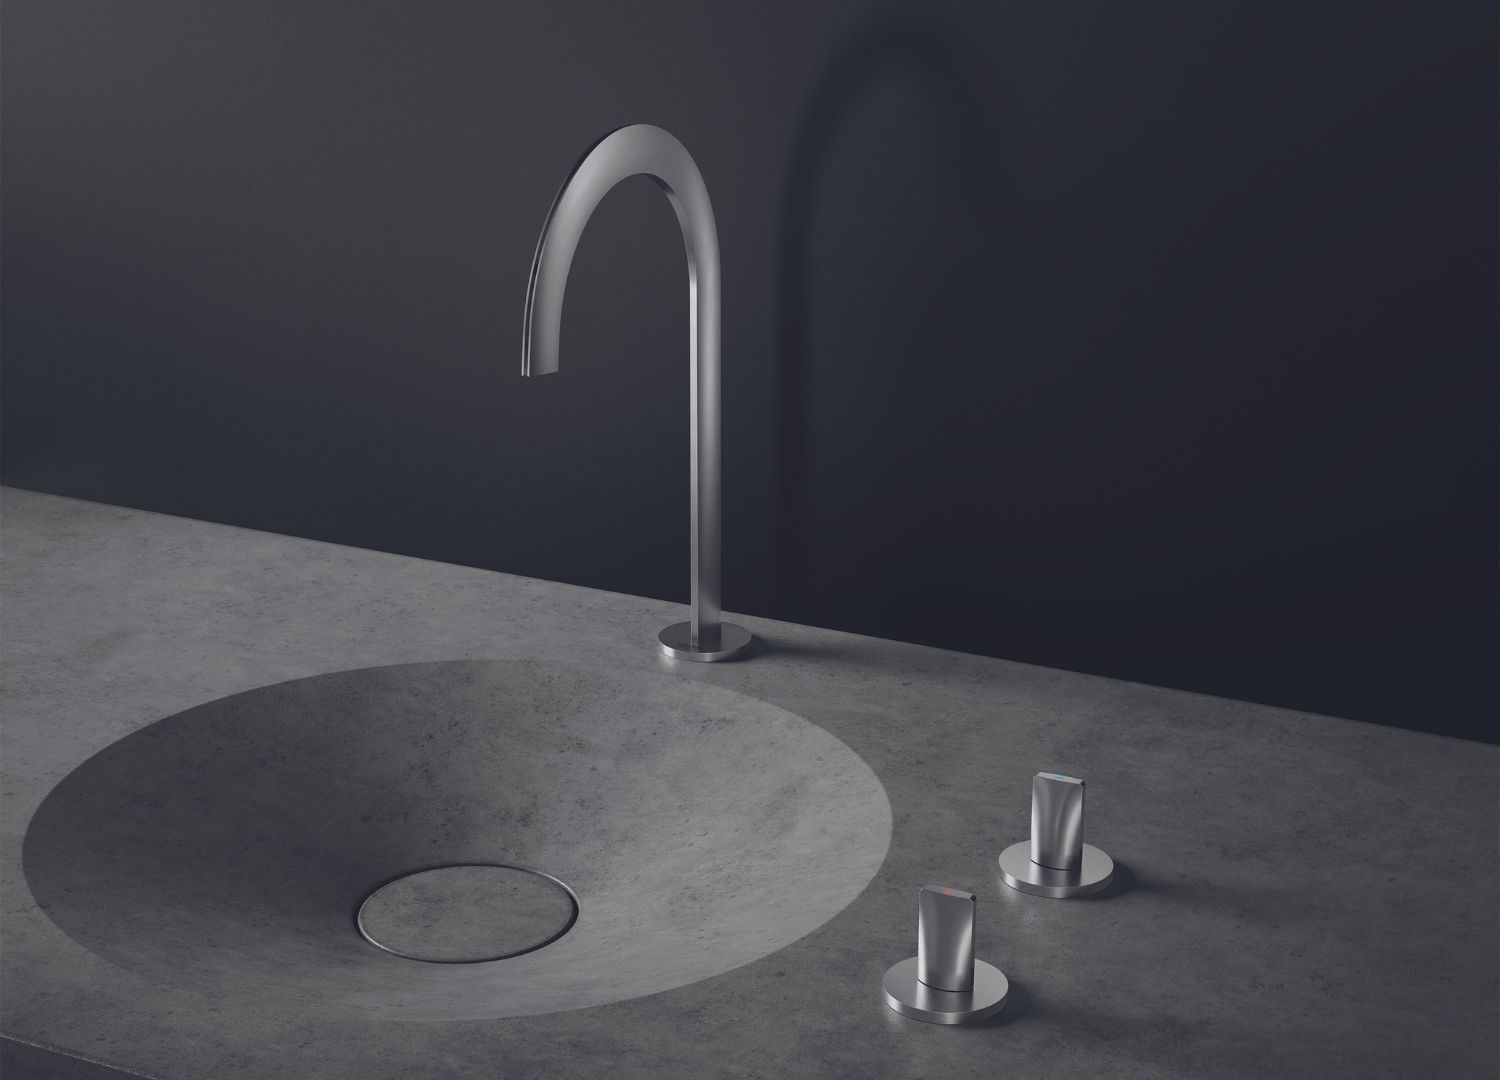 GROHE Atrio - 3d printed faucet | From products to consumers - Interview with Patrick Speck of LIXIL Global Design